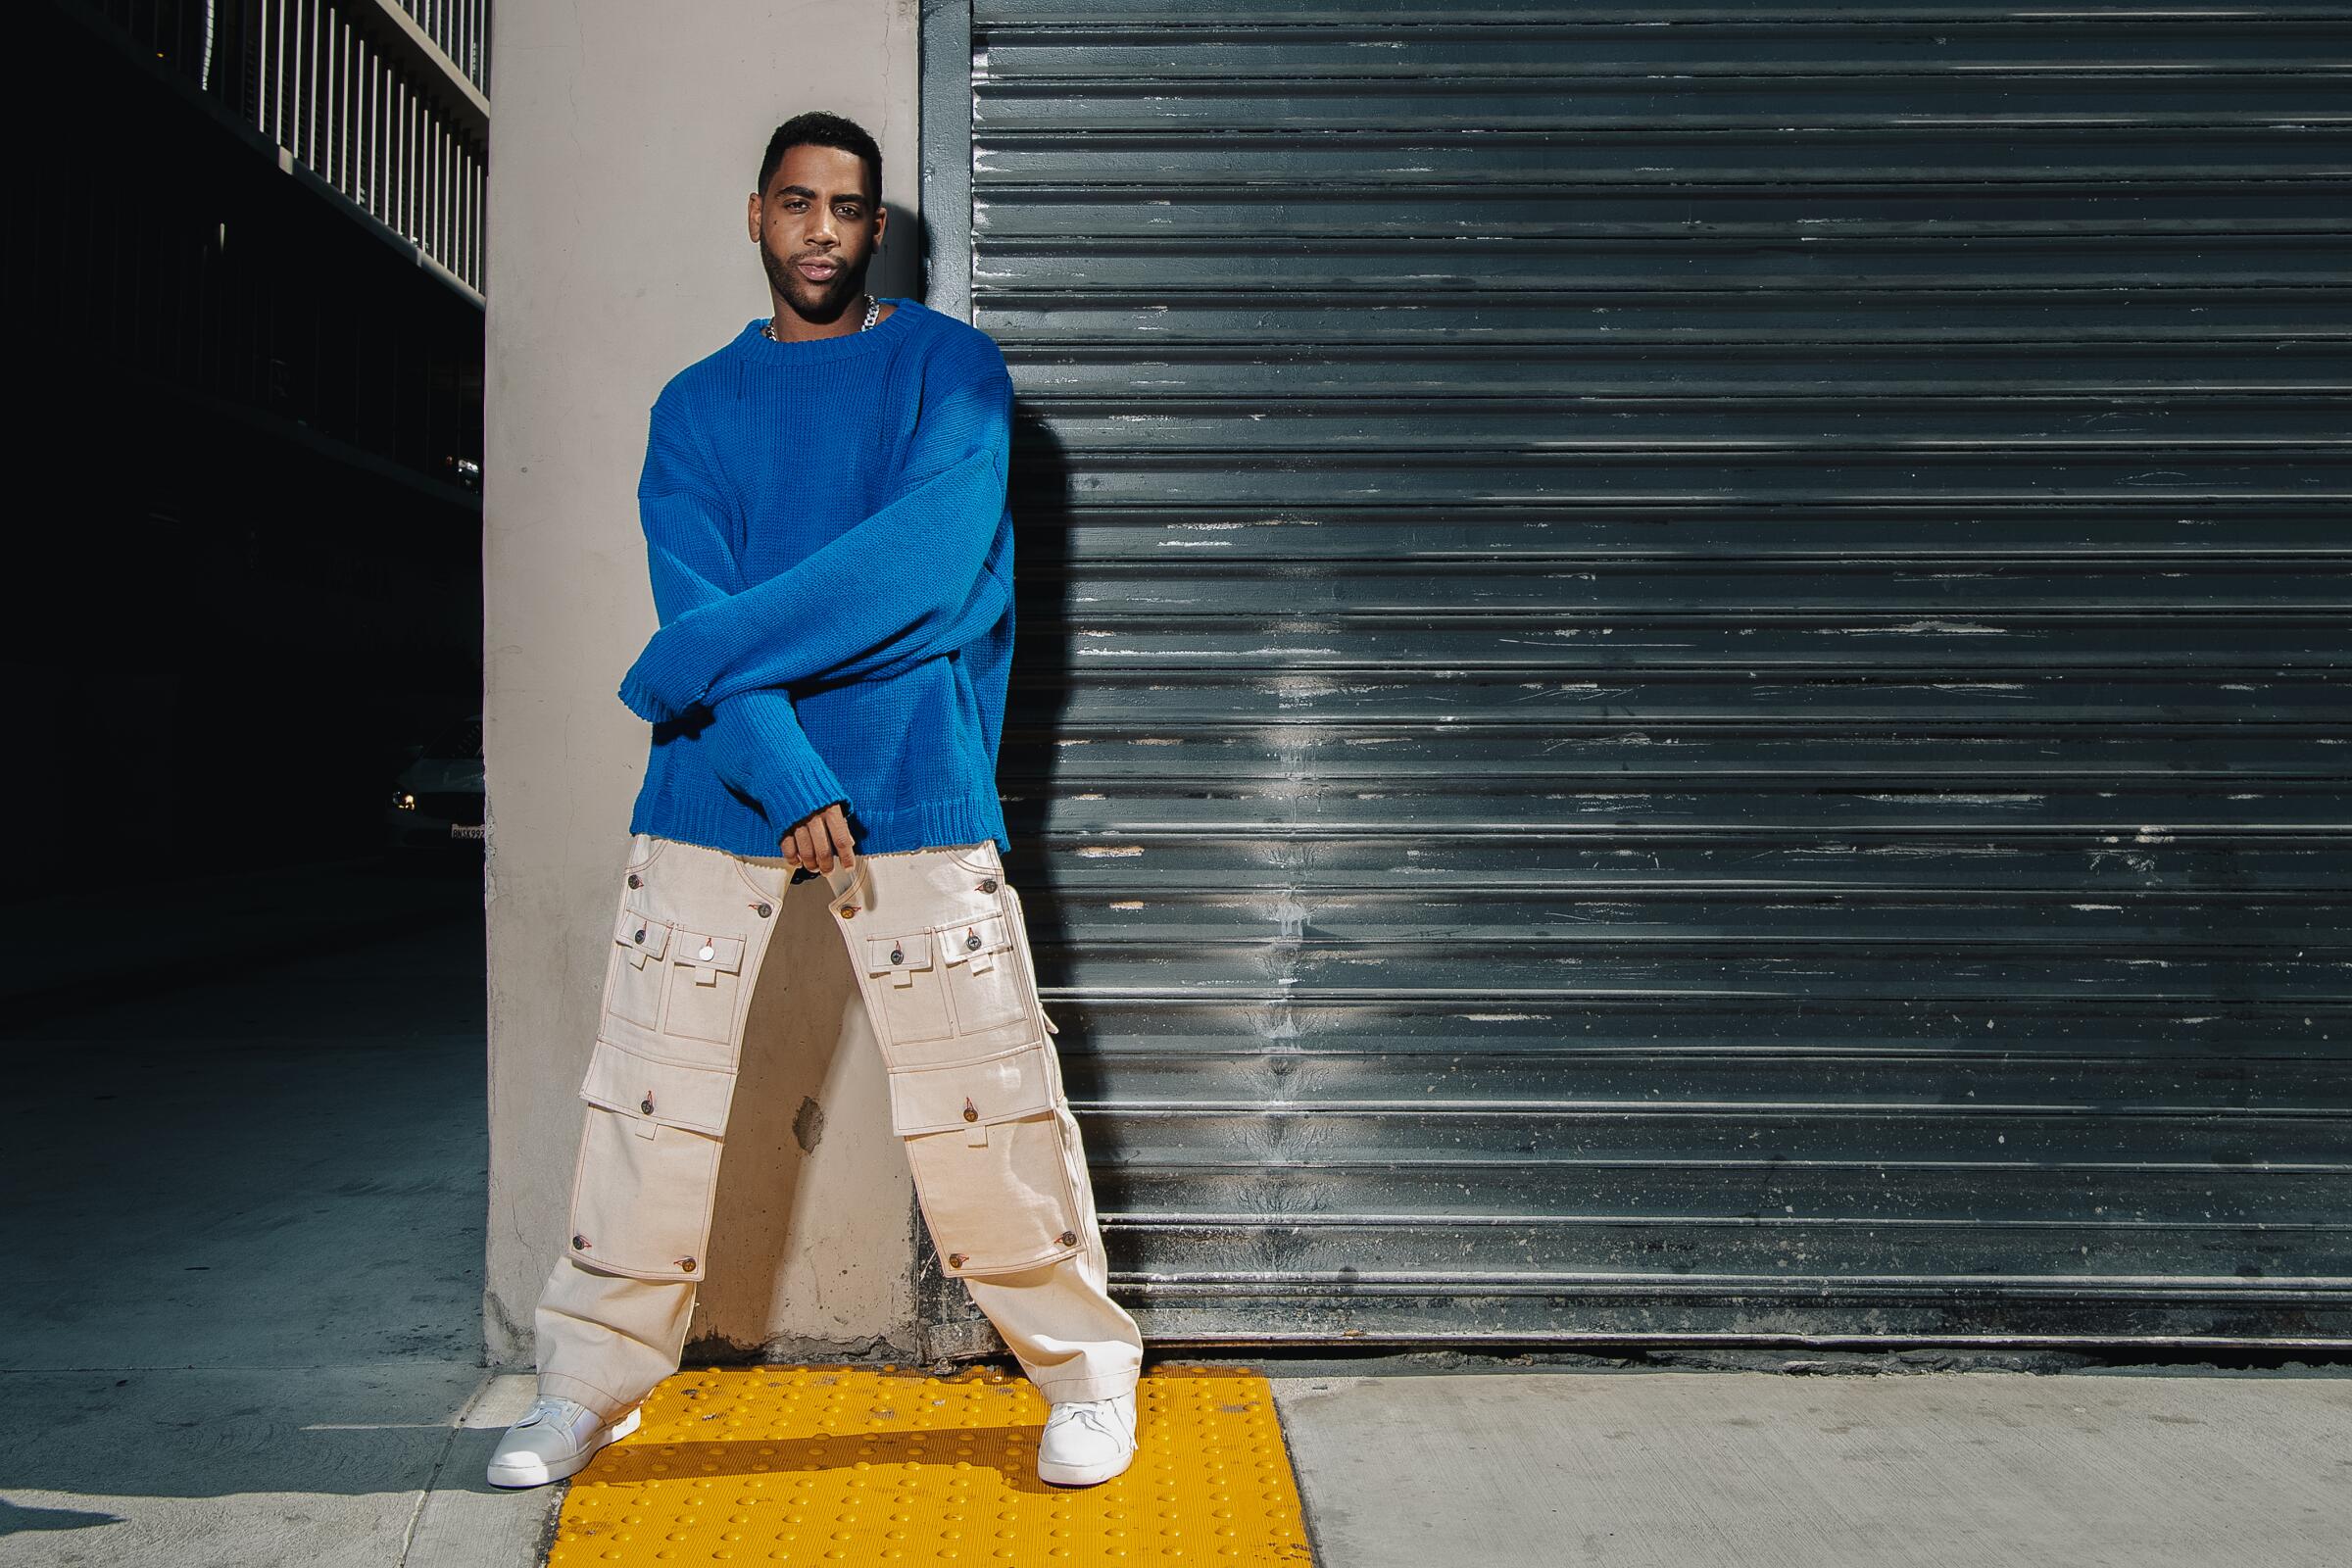 Jharrel Jerome stands near a metal gate in a blue sweater and khaki cargo pants.